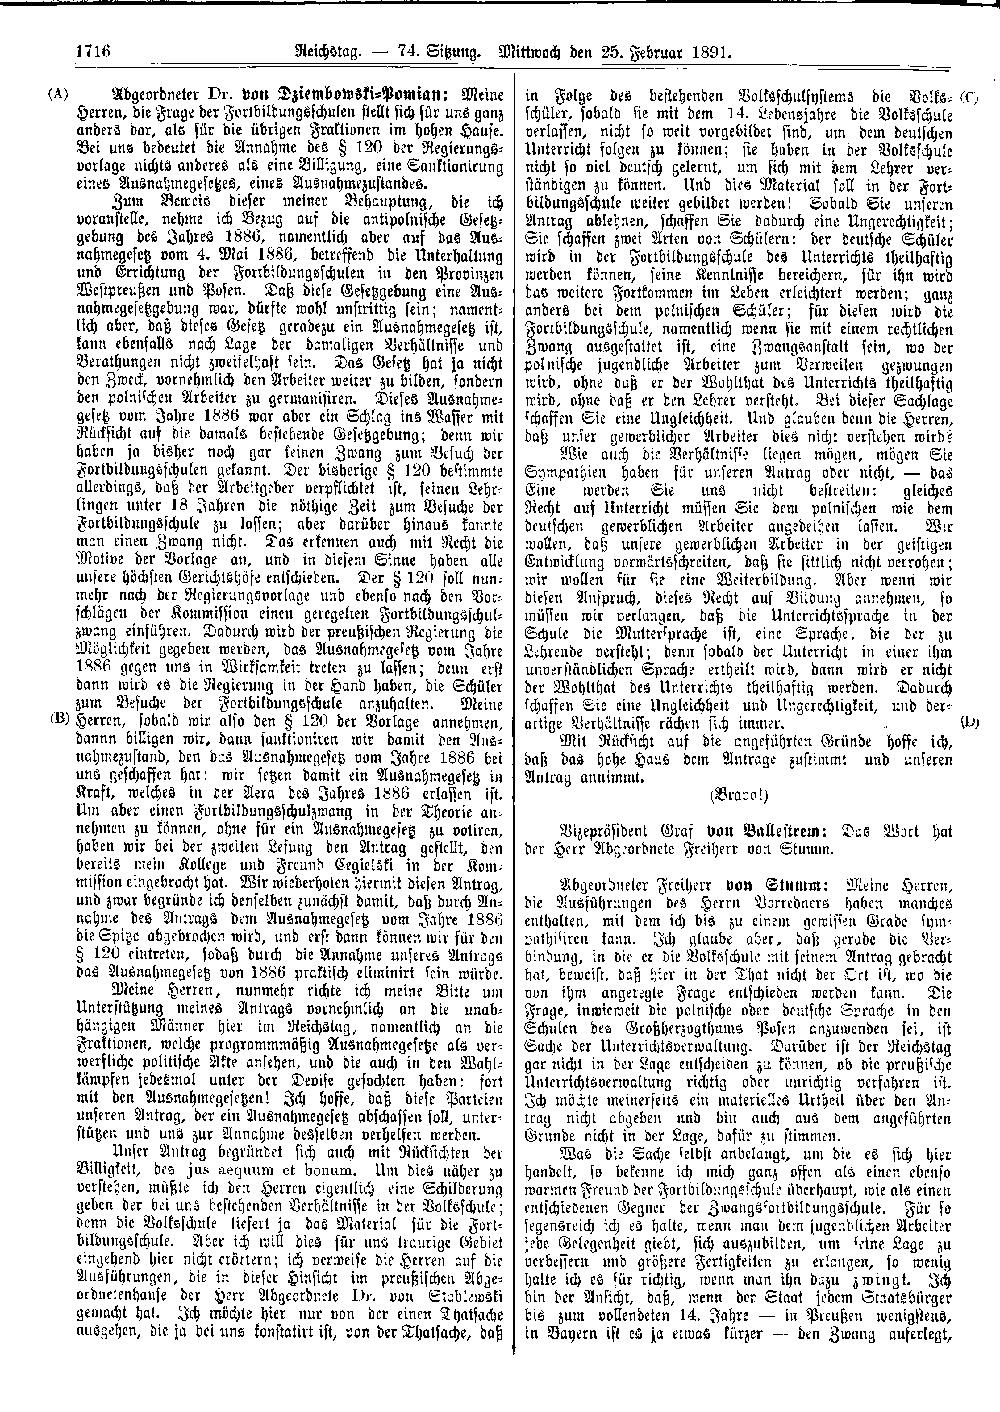 Scan of page 1716